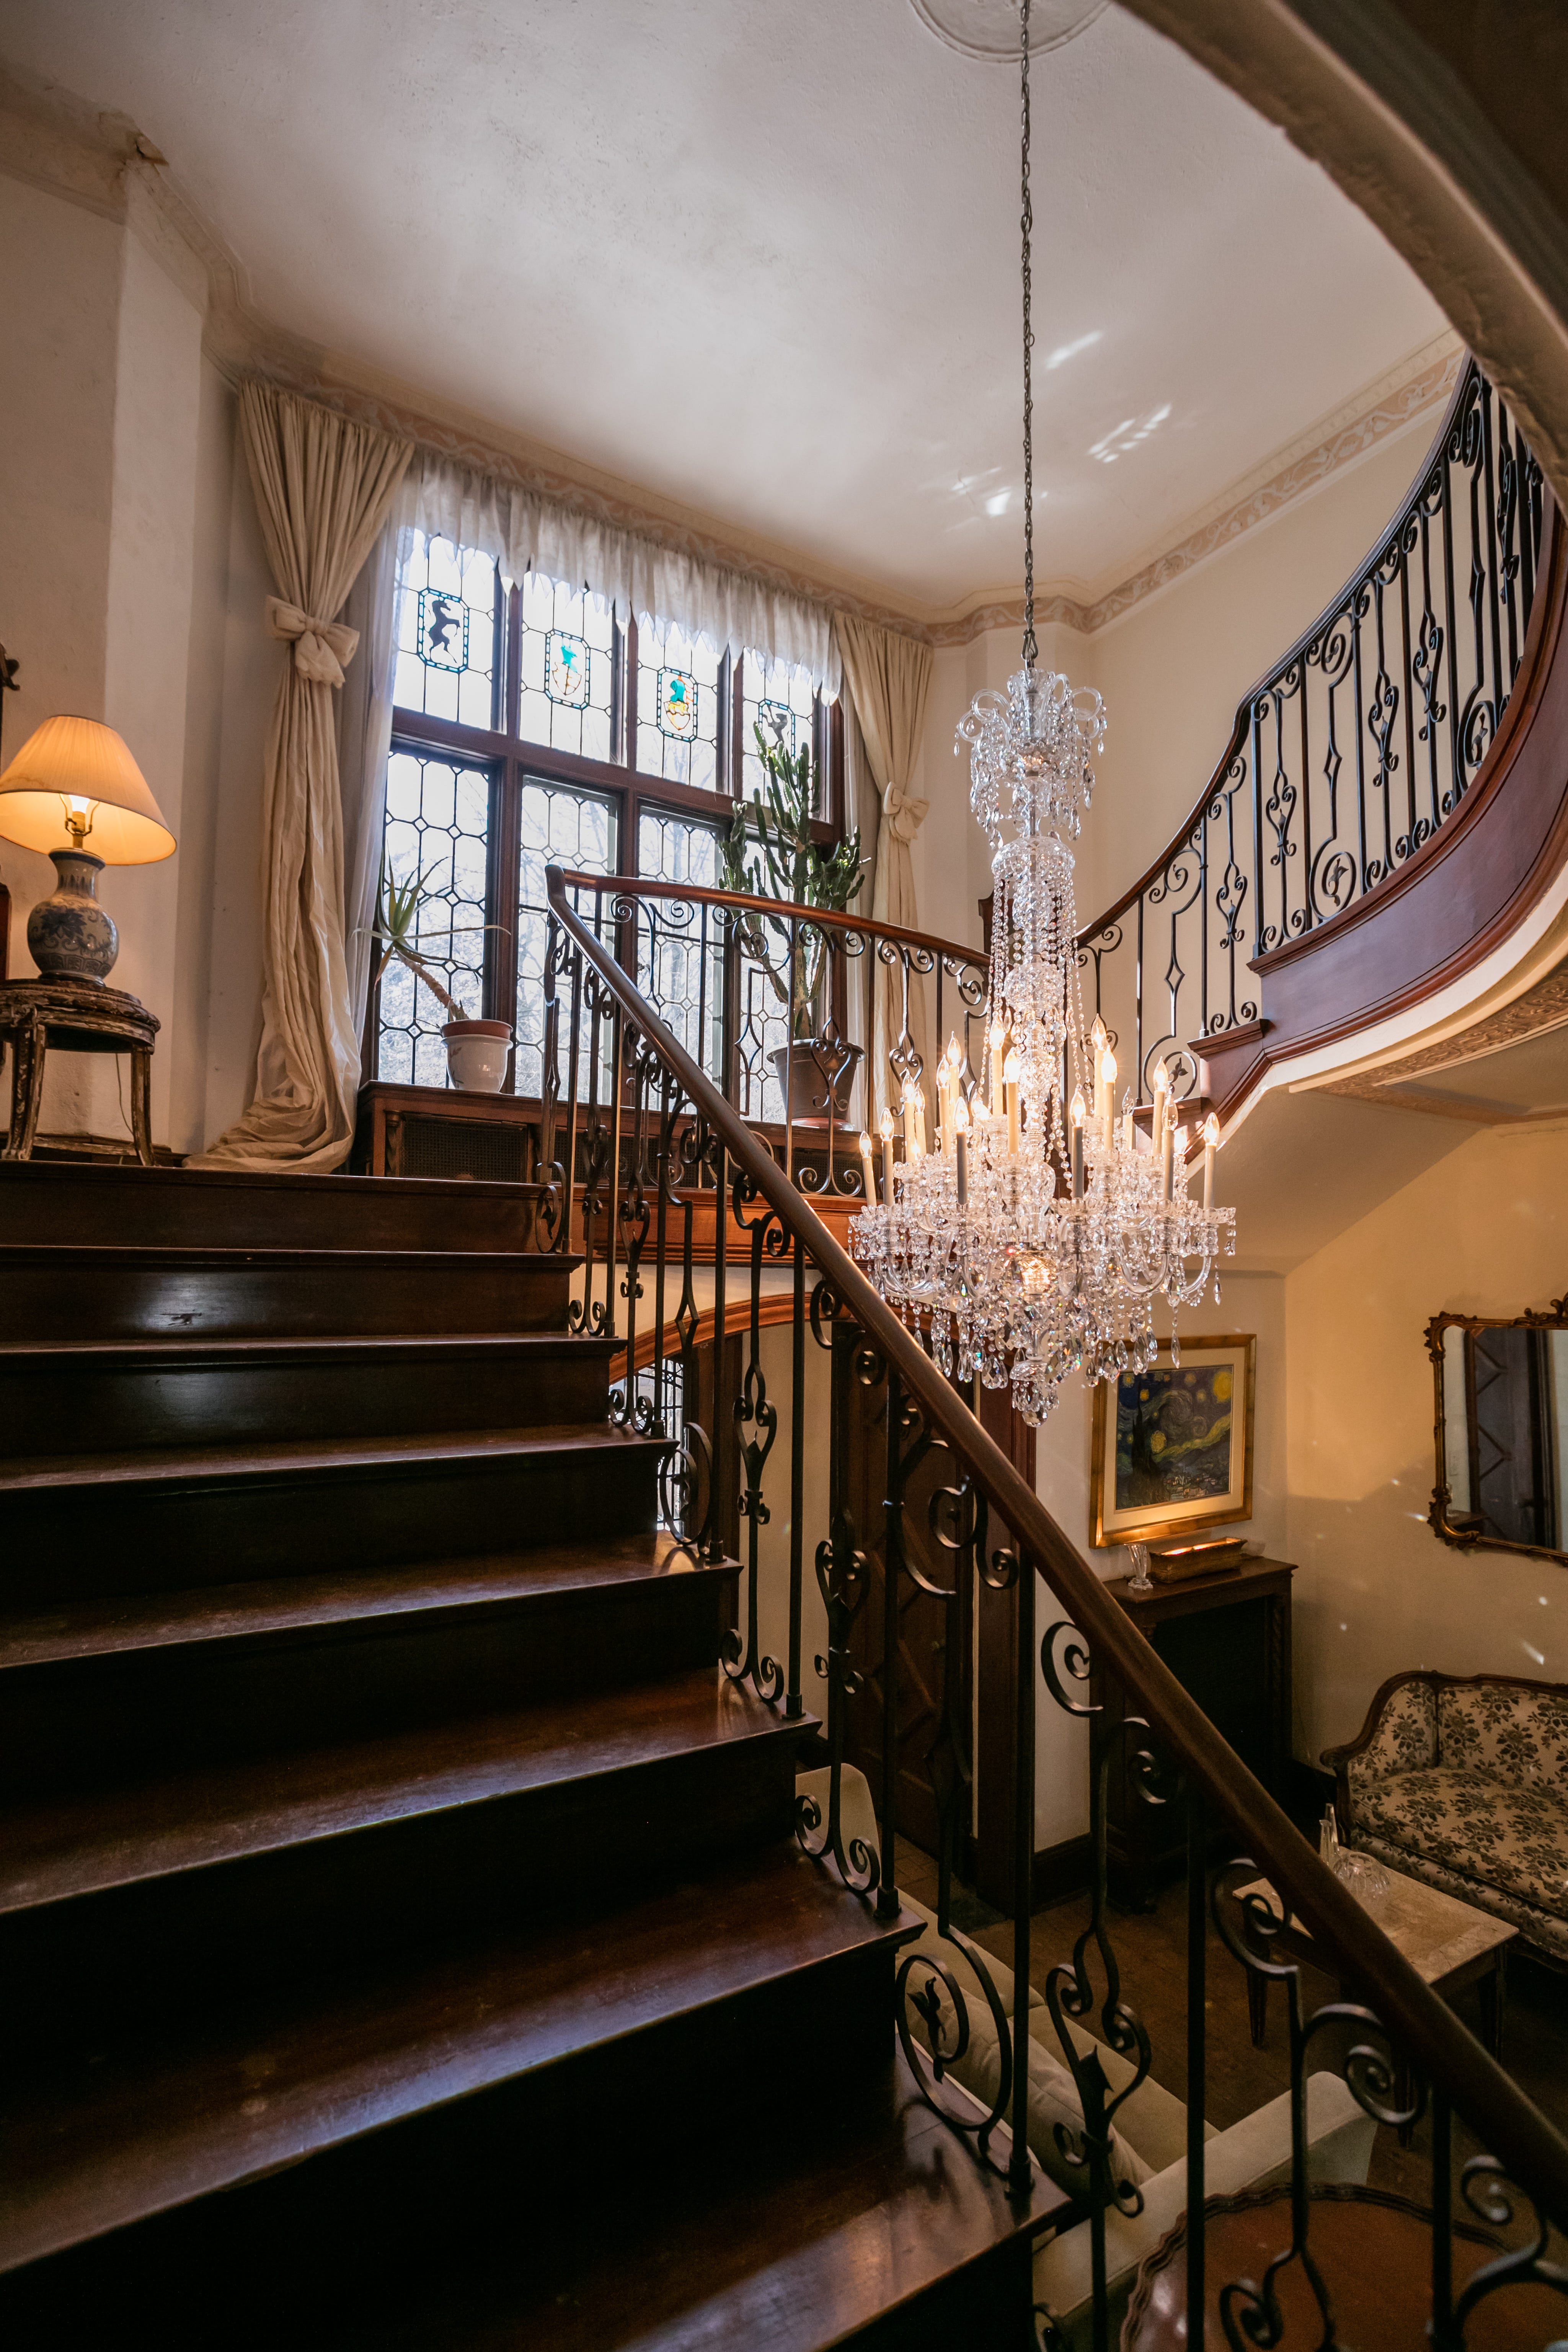 The three-story Tudor-style house, with an asking price of just under a million dollars, includes fine American custom limestone, plaster ceilings throughout, stained glass windows, brick, woodworking and slate.